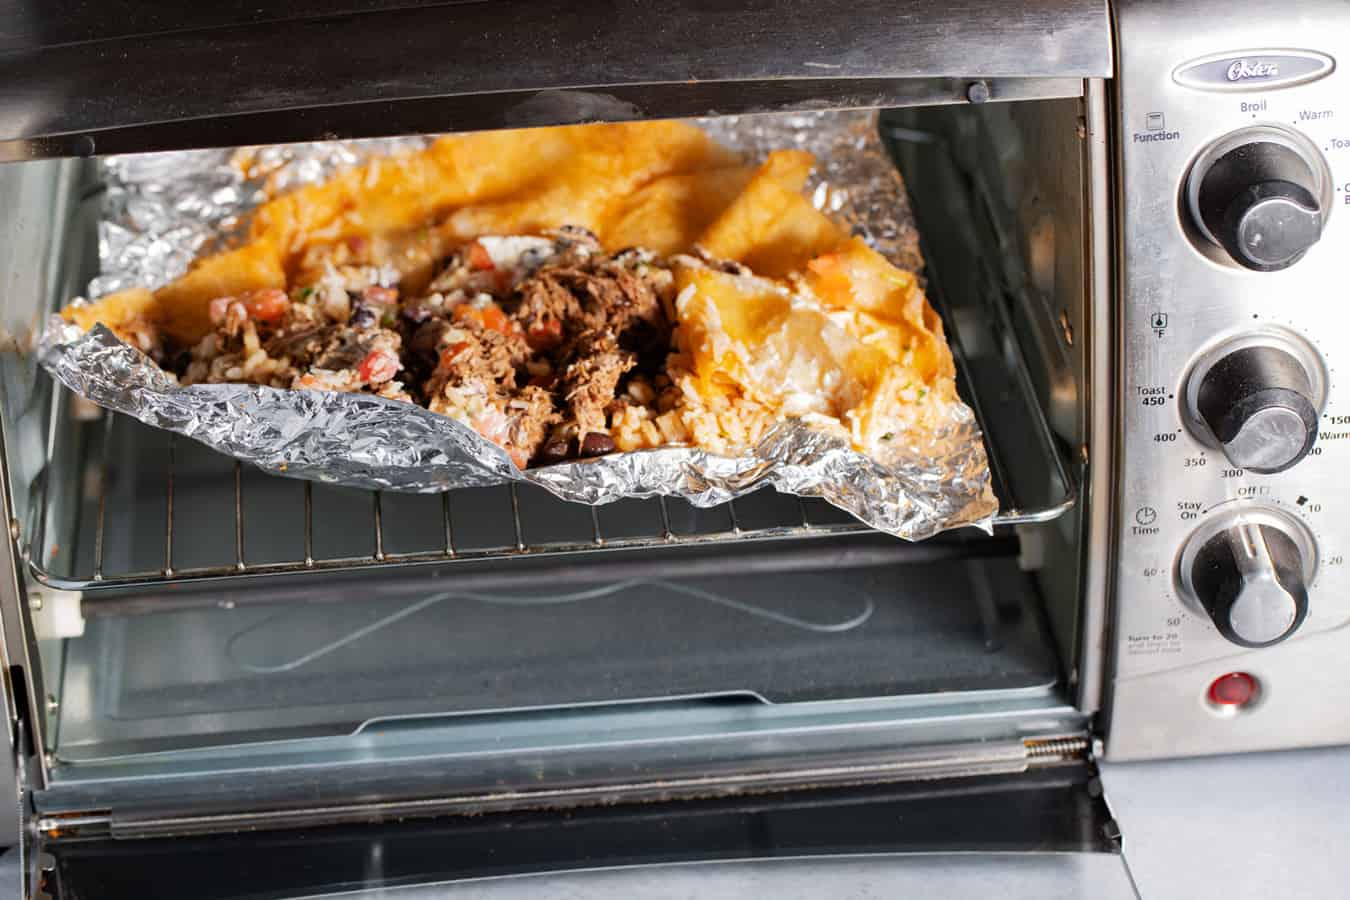 How To Reheat A Burrito In A Toaster Oven